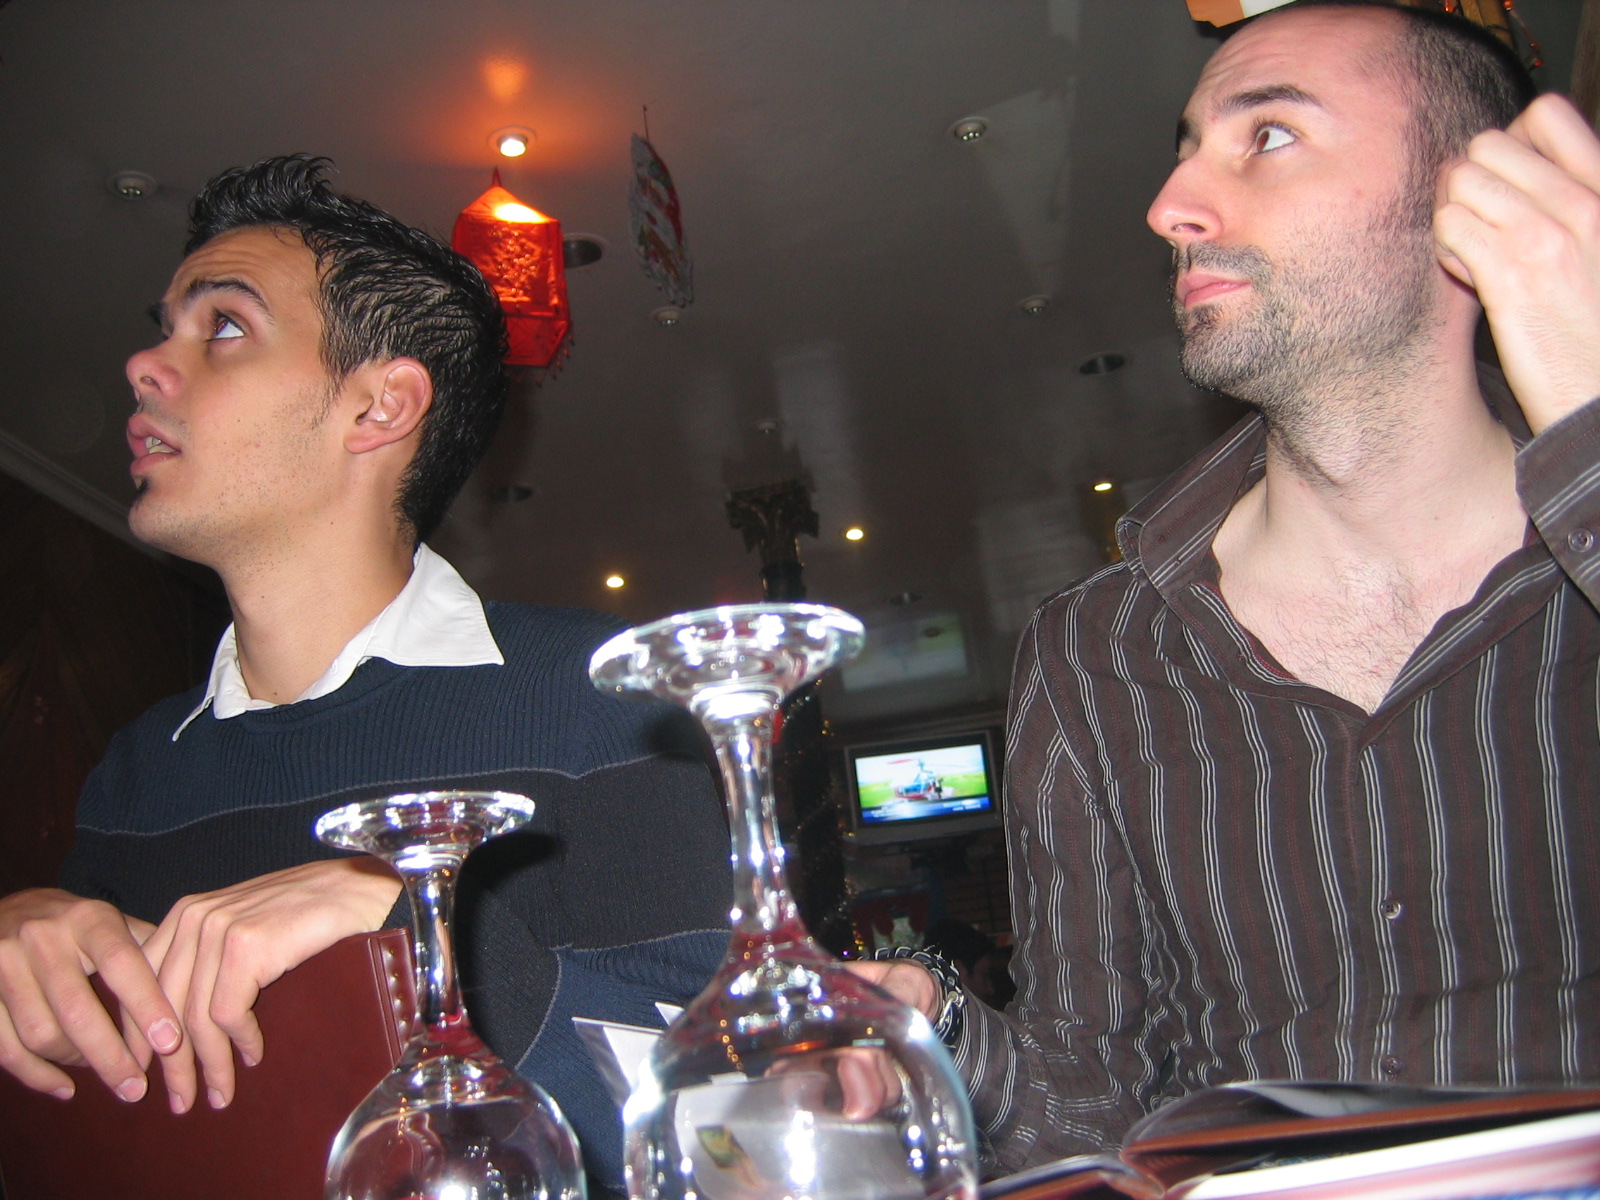 two men seated at a bar one holding a candle